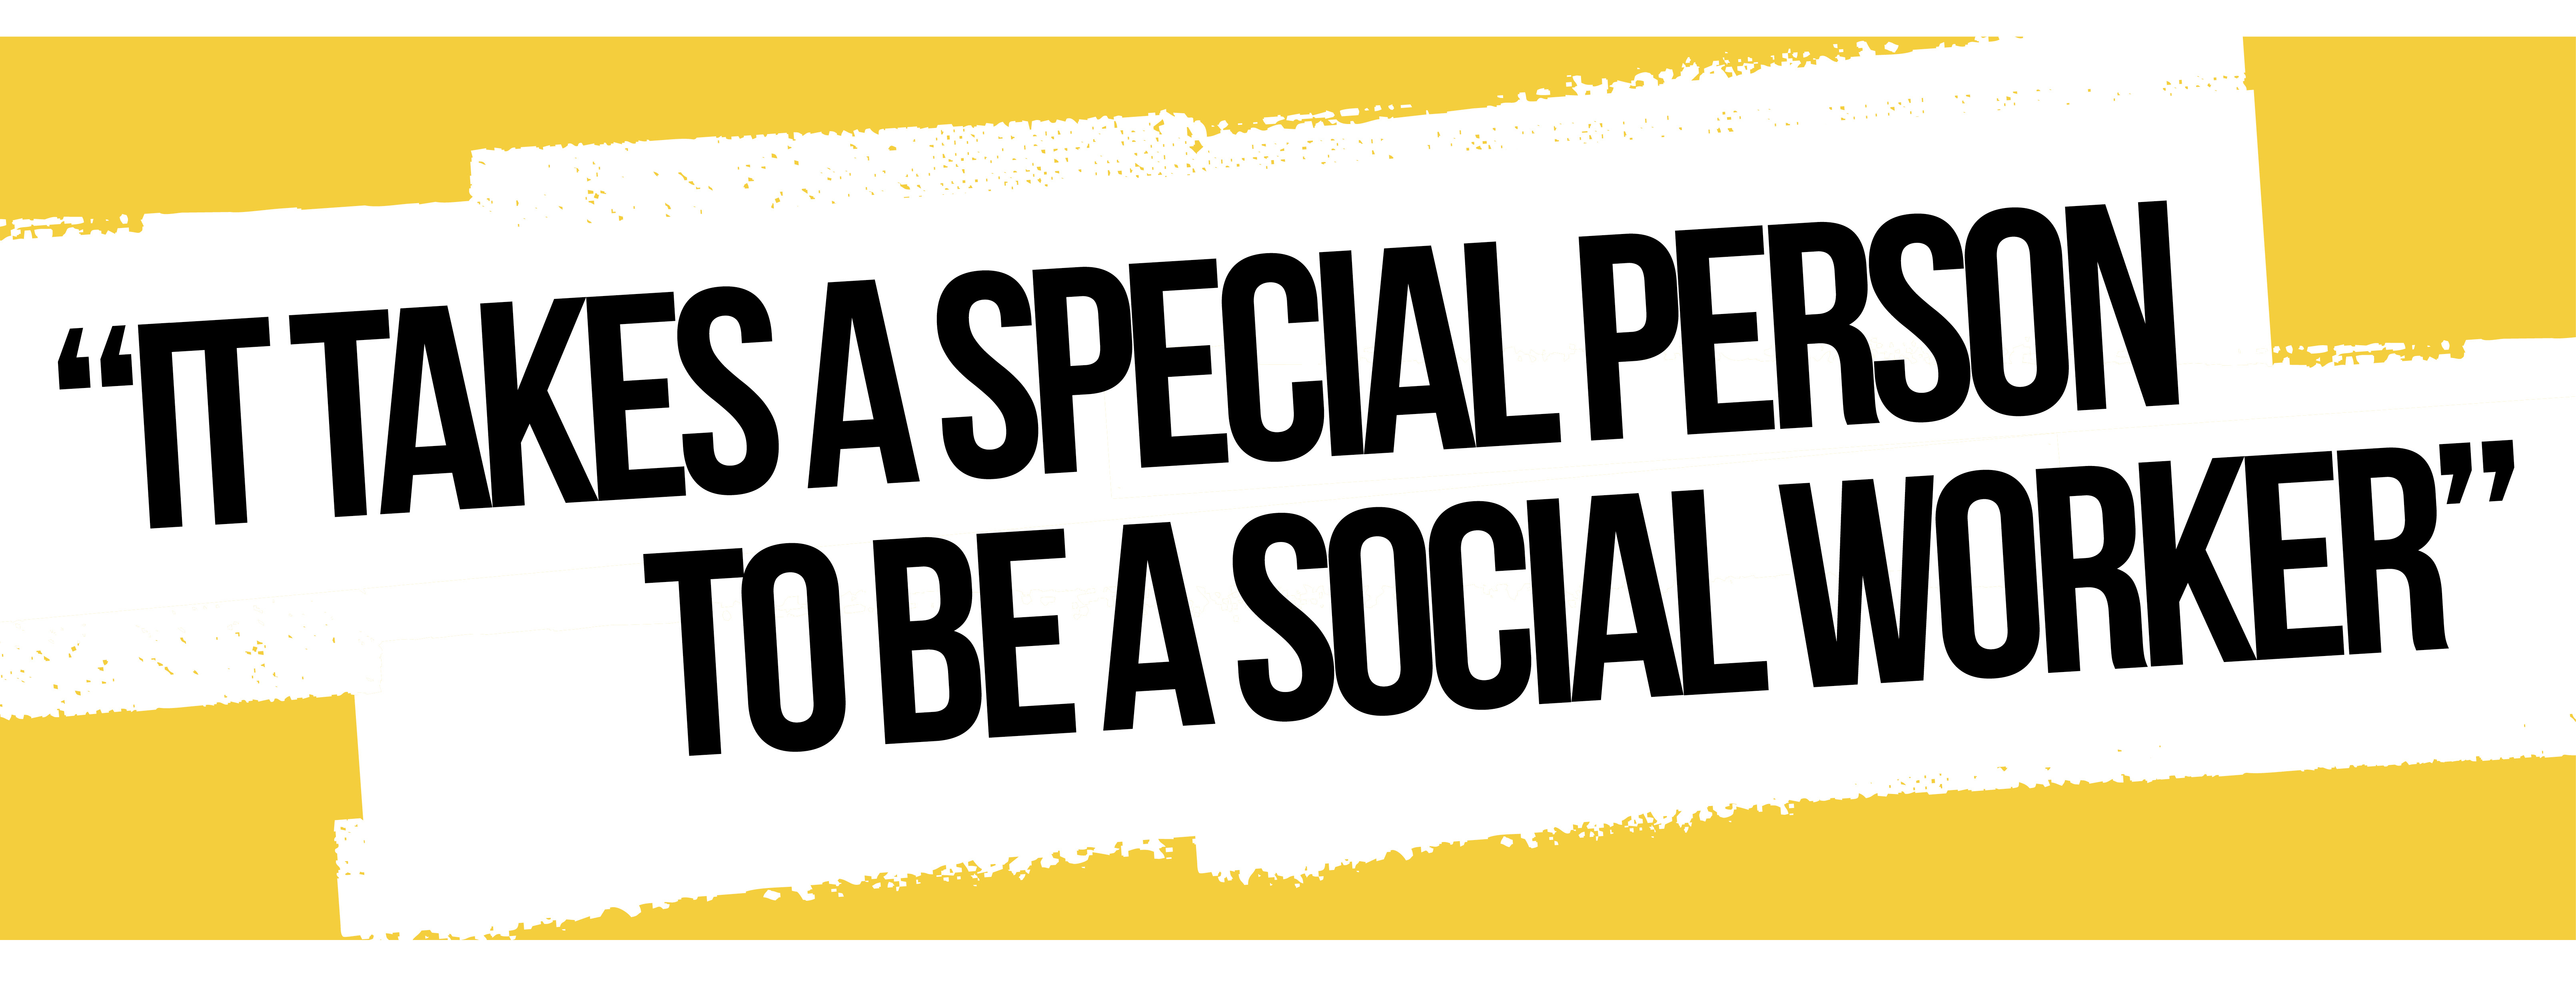 "It takes a special person to be a social worker"